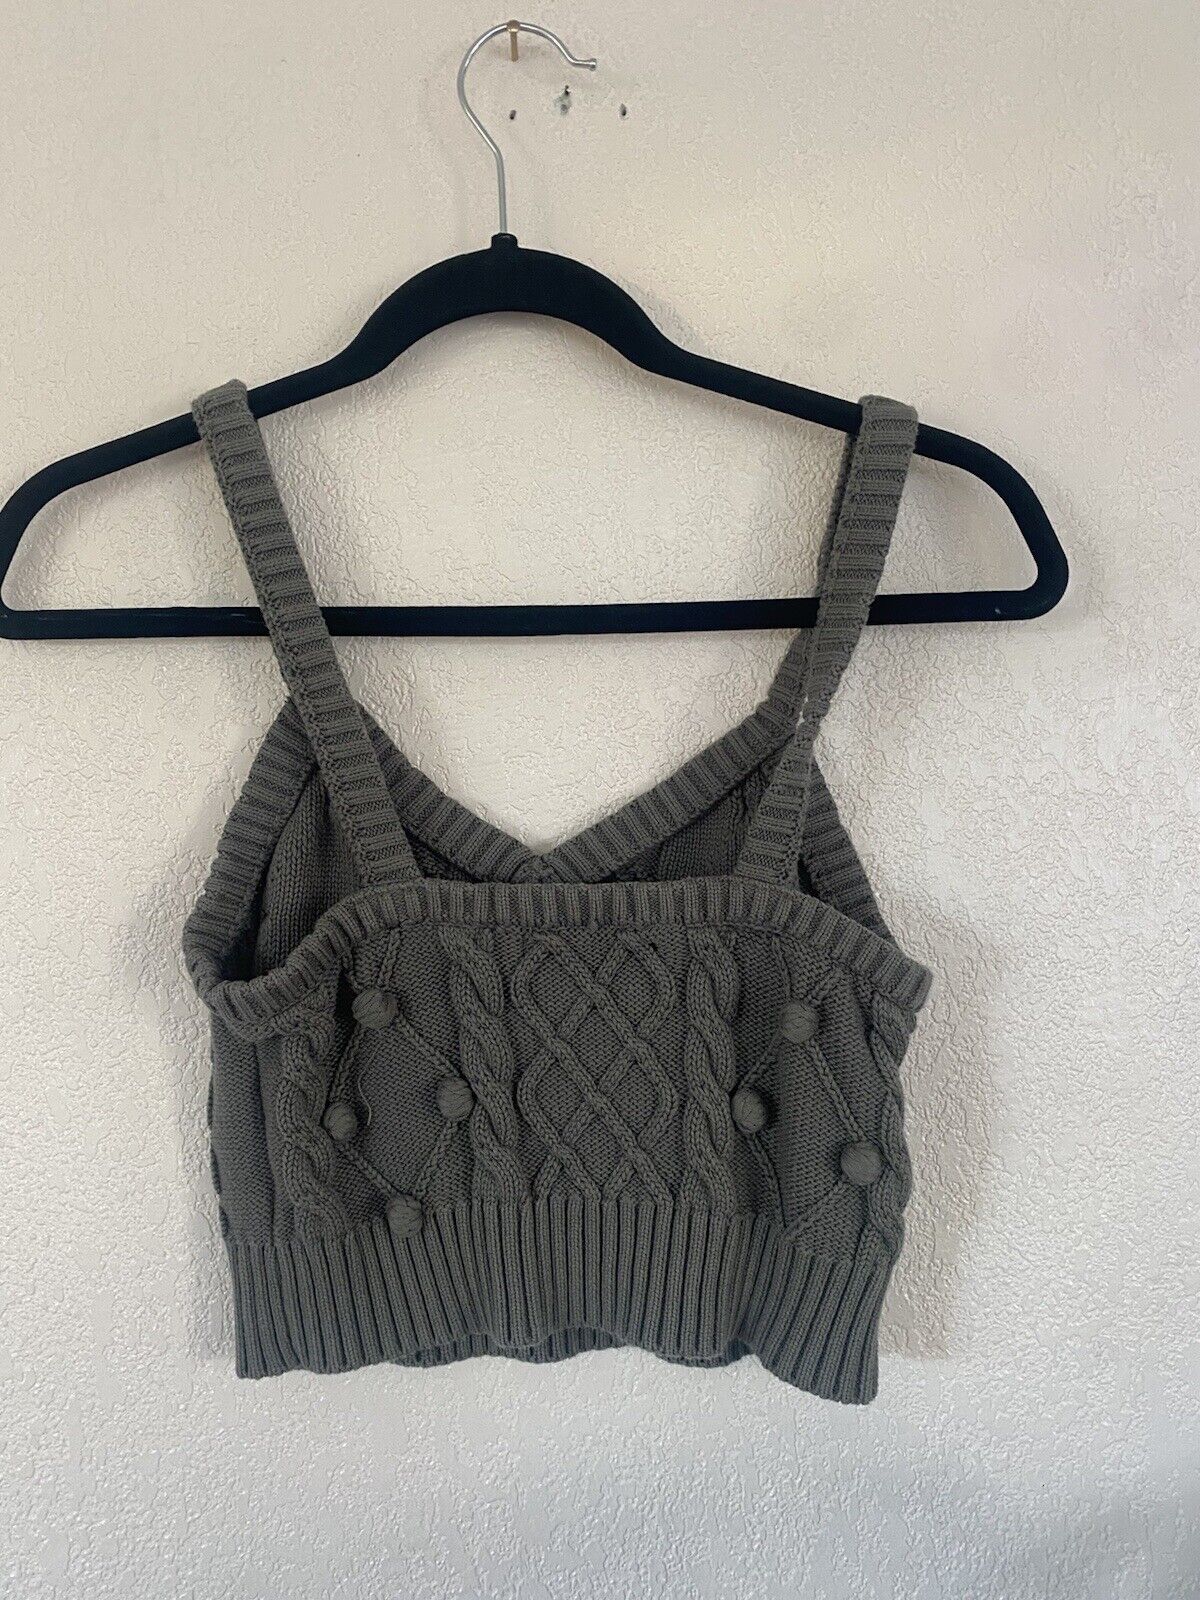 Green Knit Tank Top - Unbranded - Women's Small # 2070